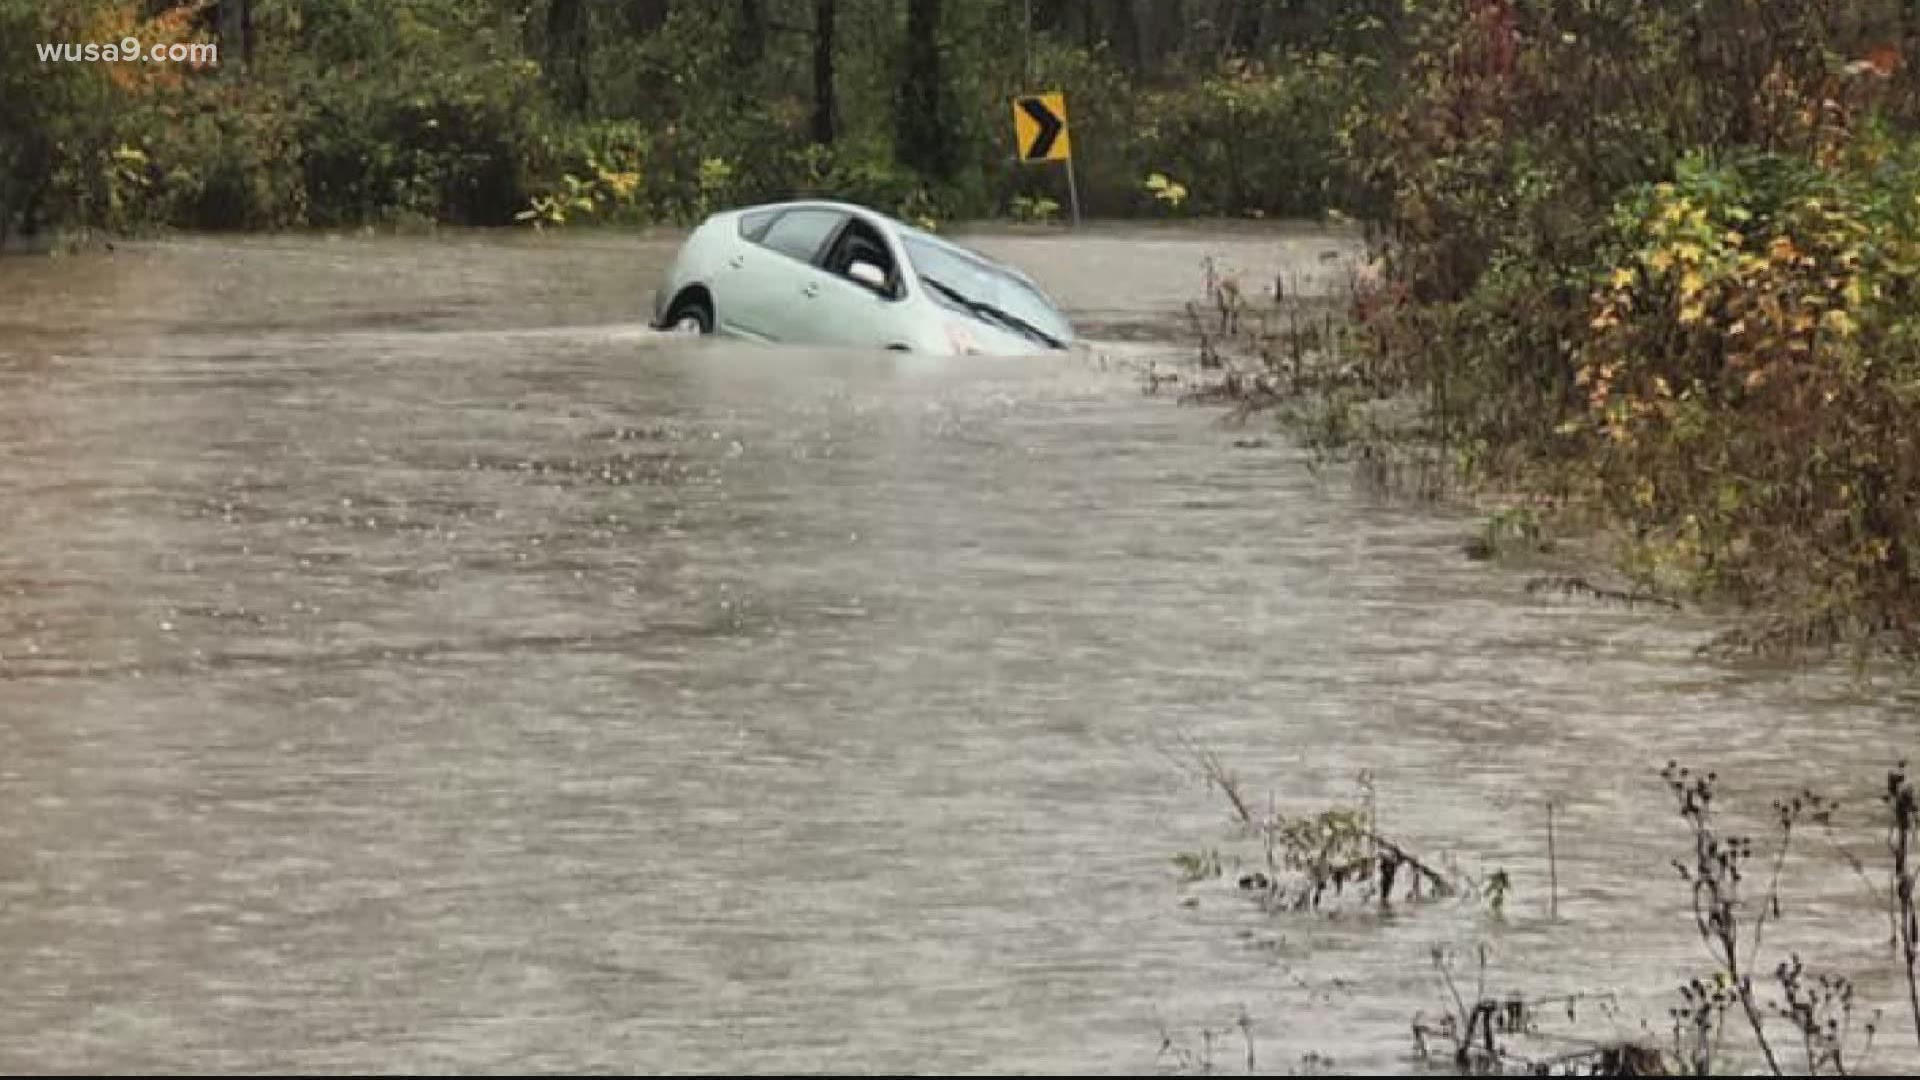 Stafford County resident Maria Edgar said floodwaters swept her car off a Stafford County roadway two weeks ago during a heavy storm.